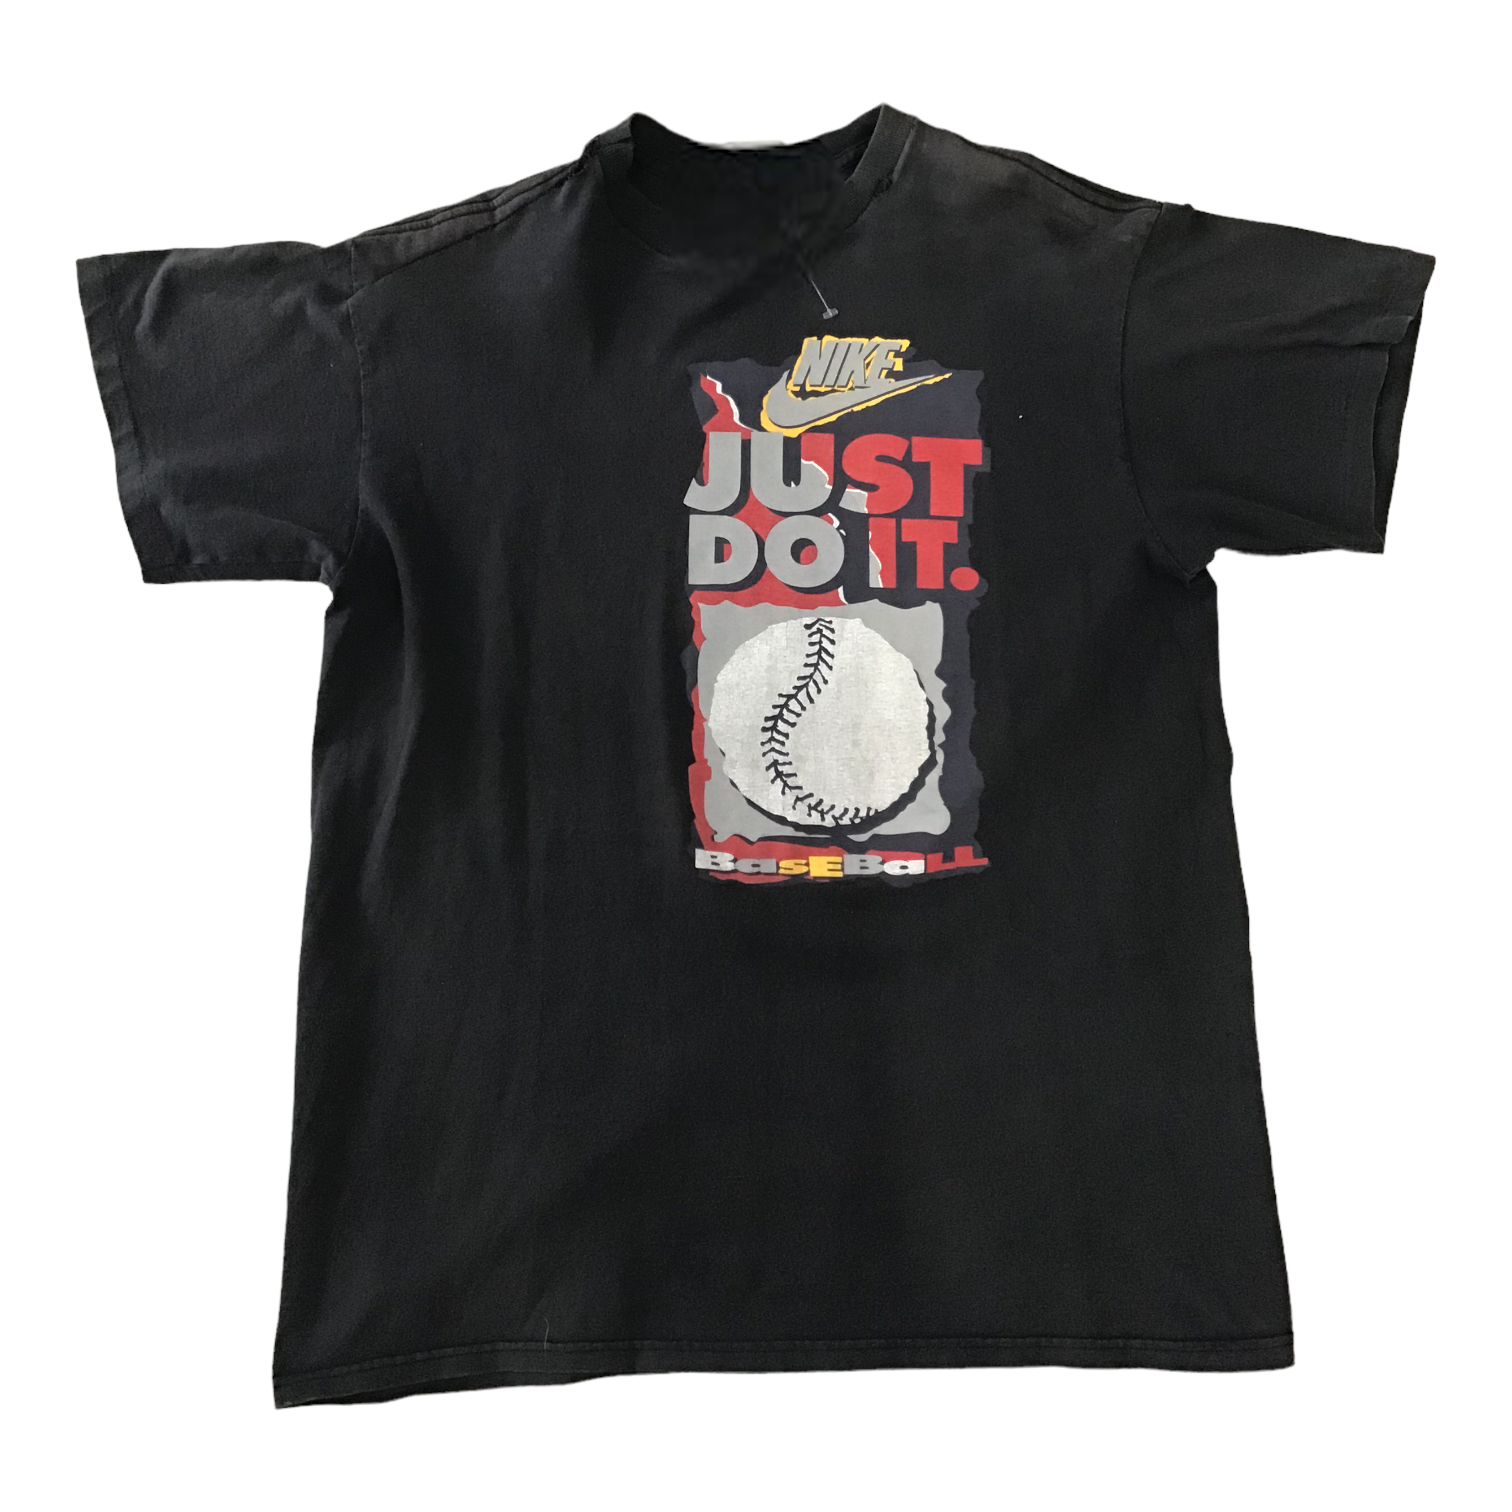 1990's Nike Just do it Baseball vintage tee – The Pop up shop